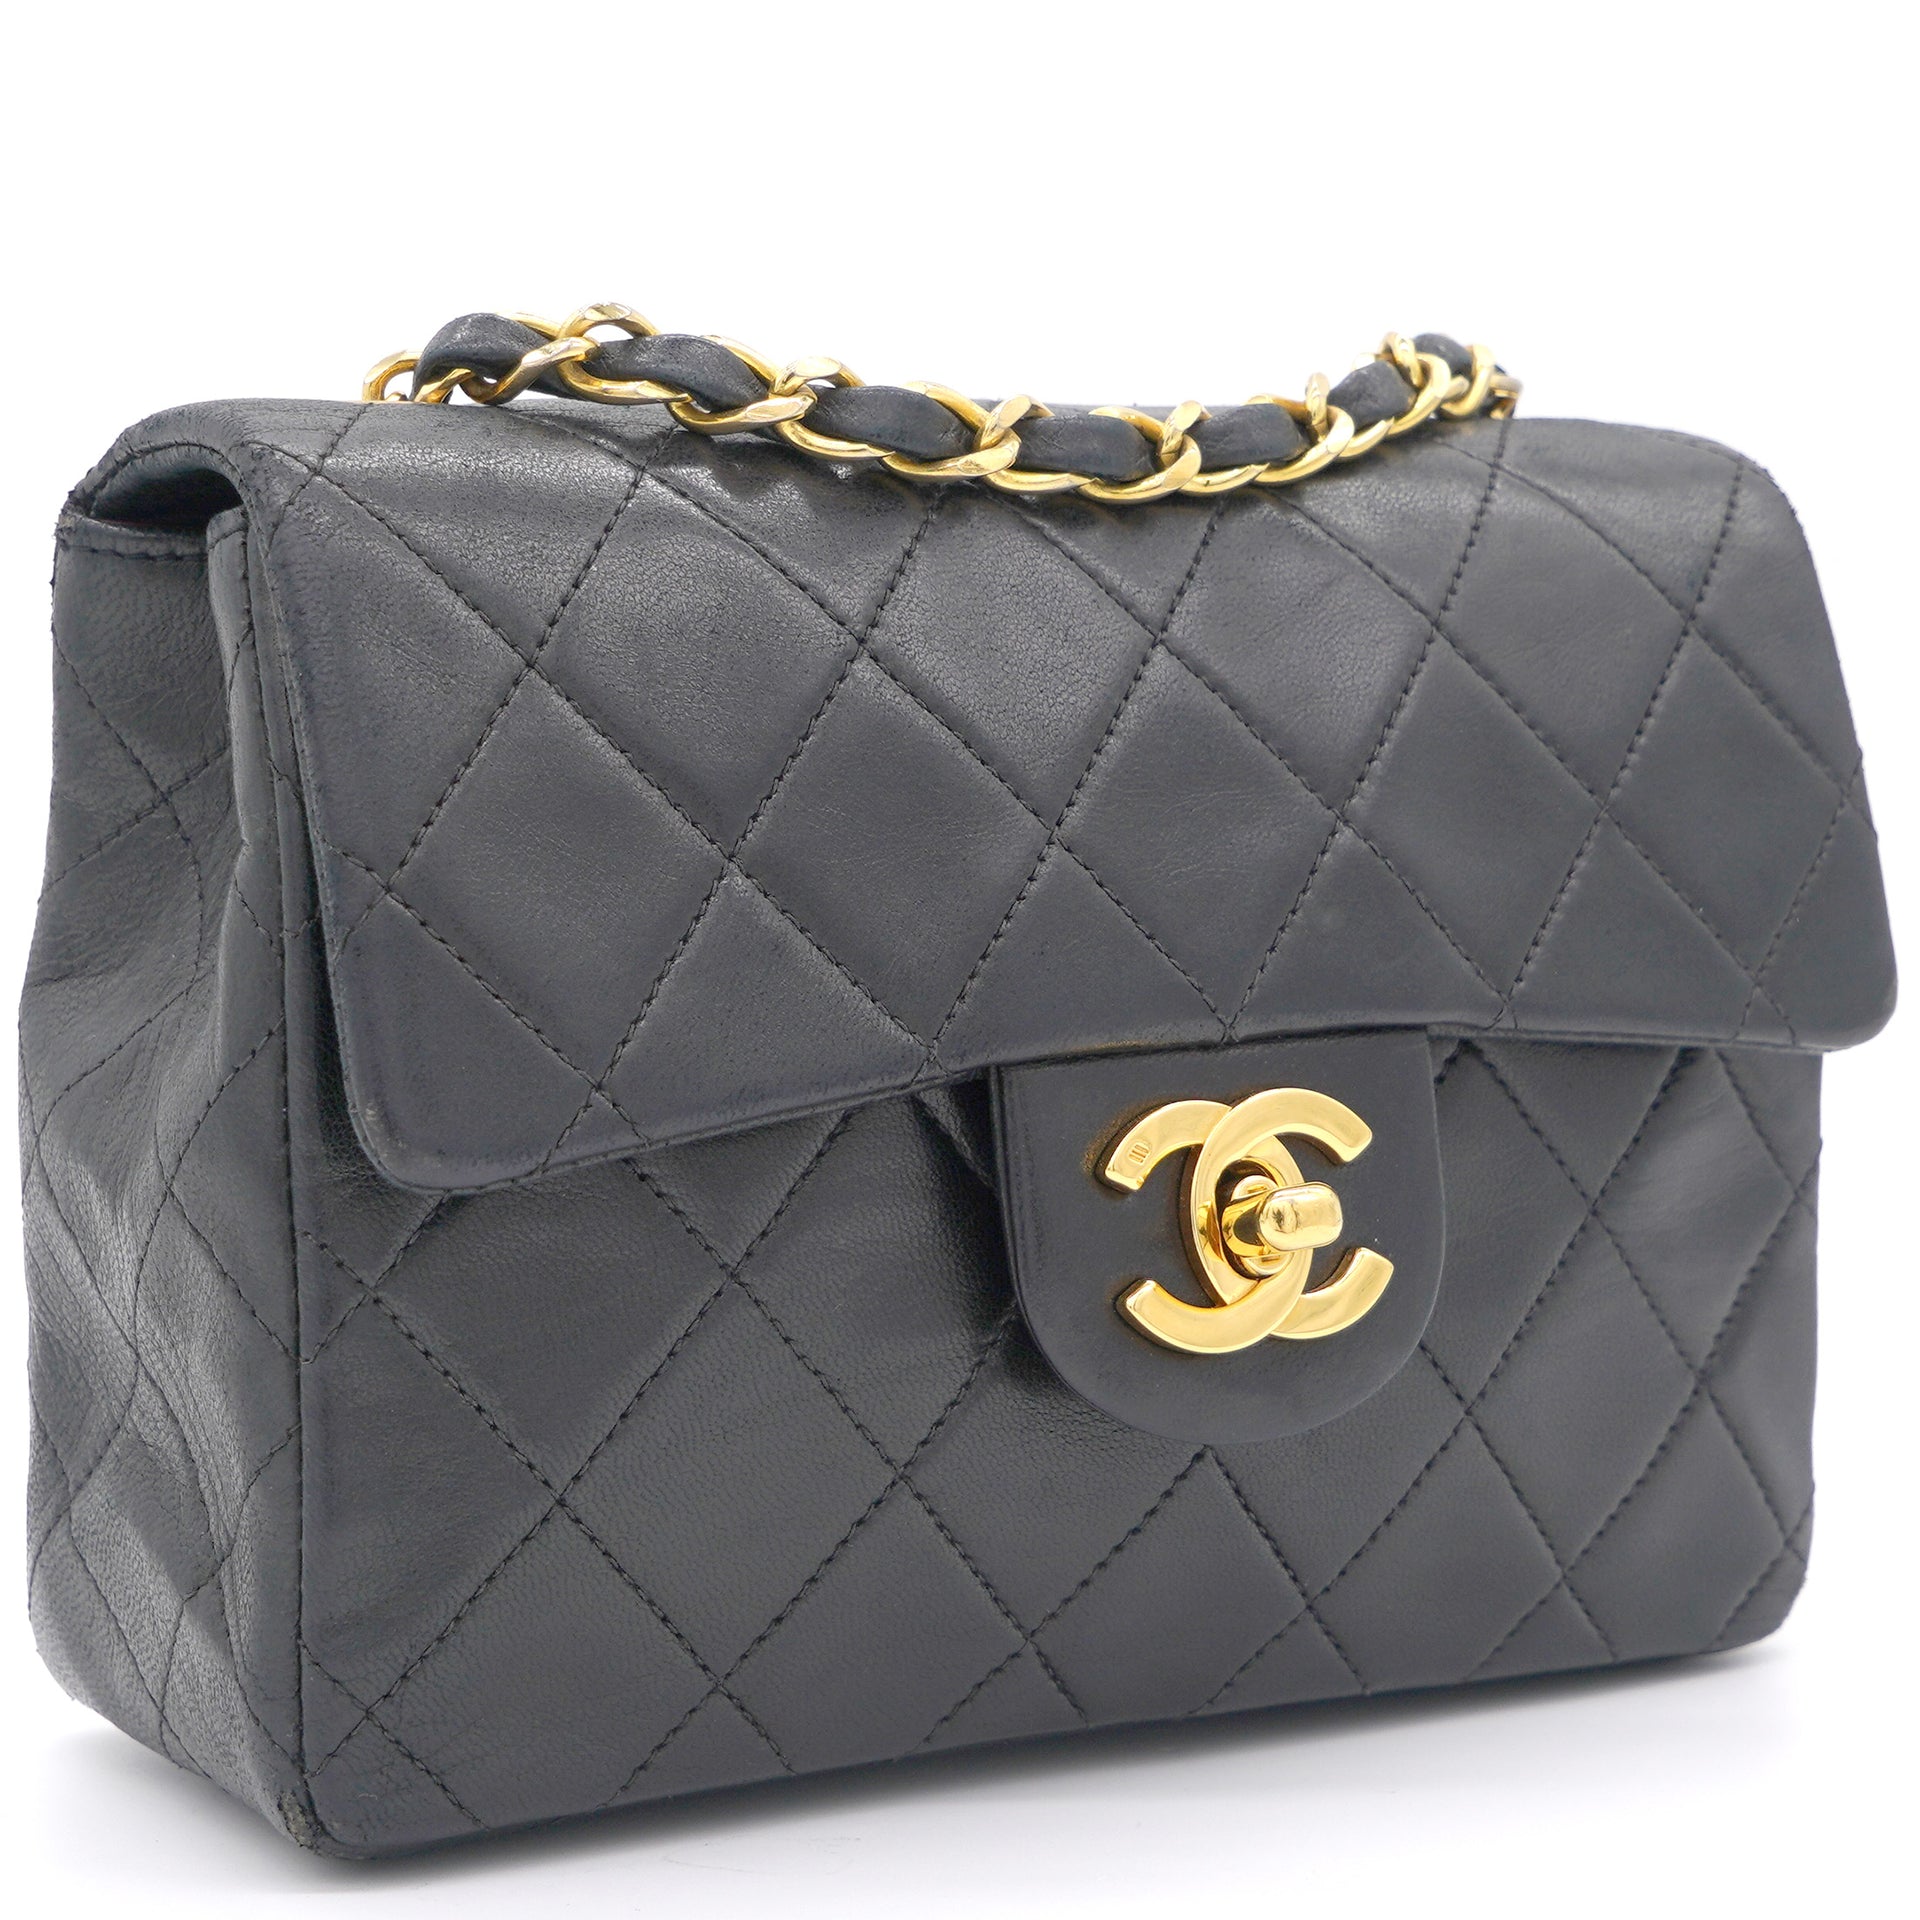 Chanel B35 Chanel 2.55 10inch Double Flap Black Quilted Leather